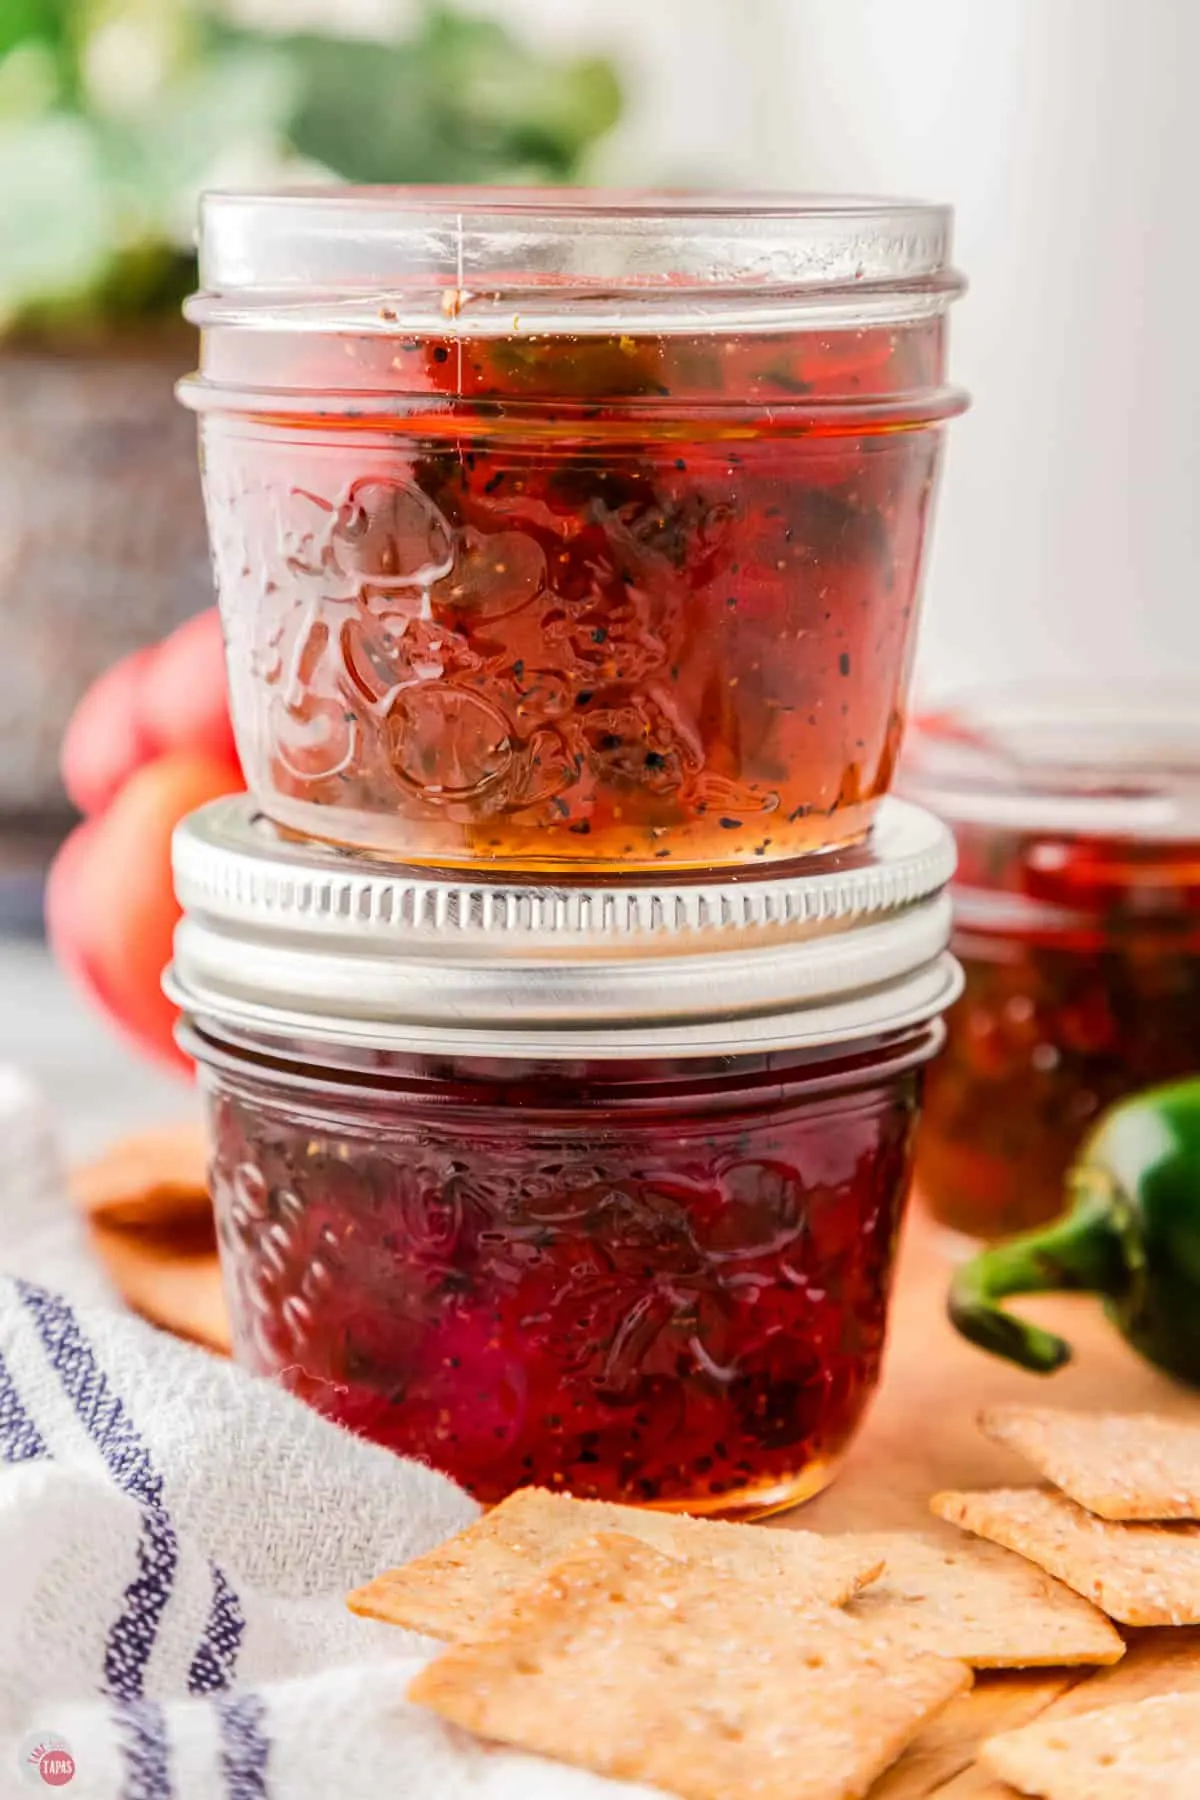 stack of jars of jelly make great gifts!